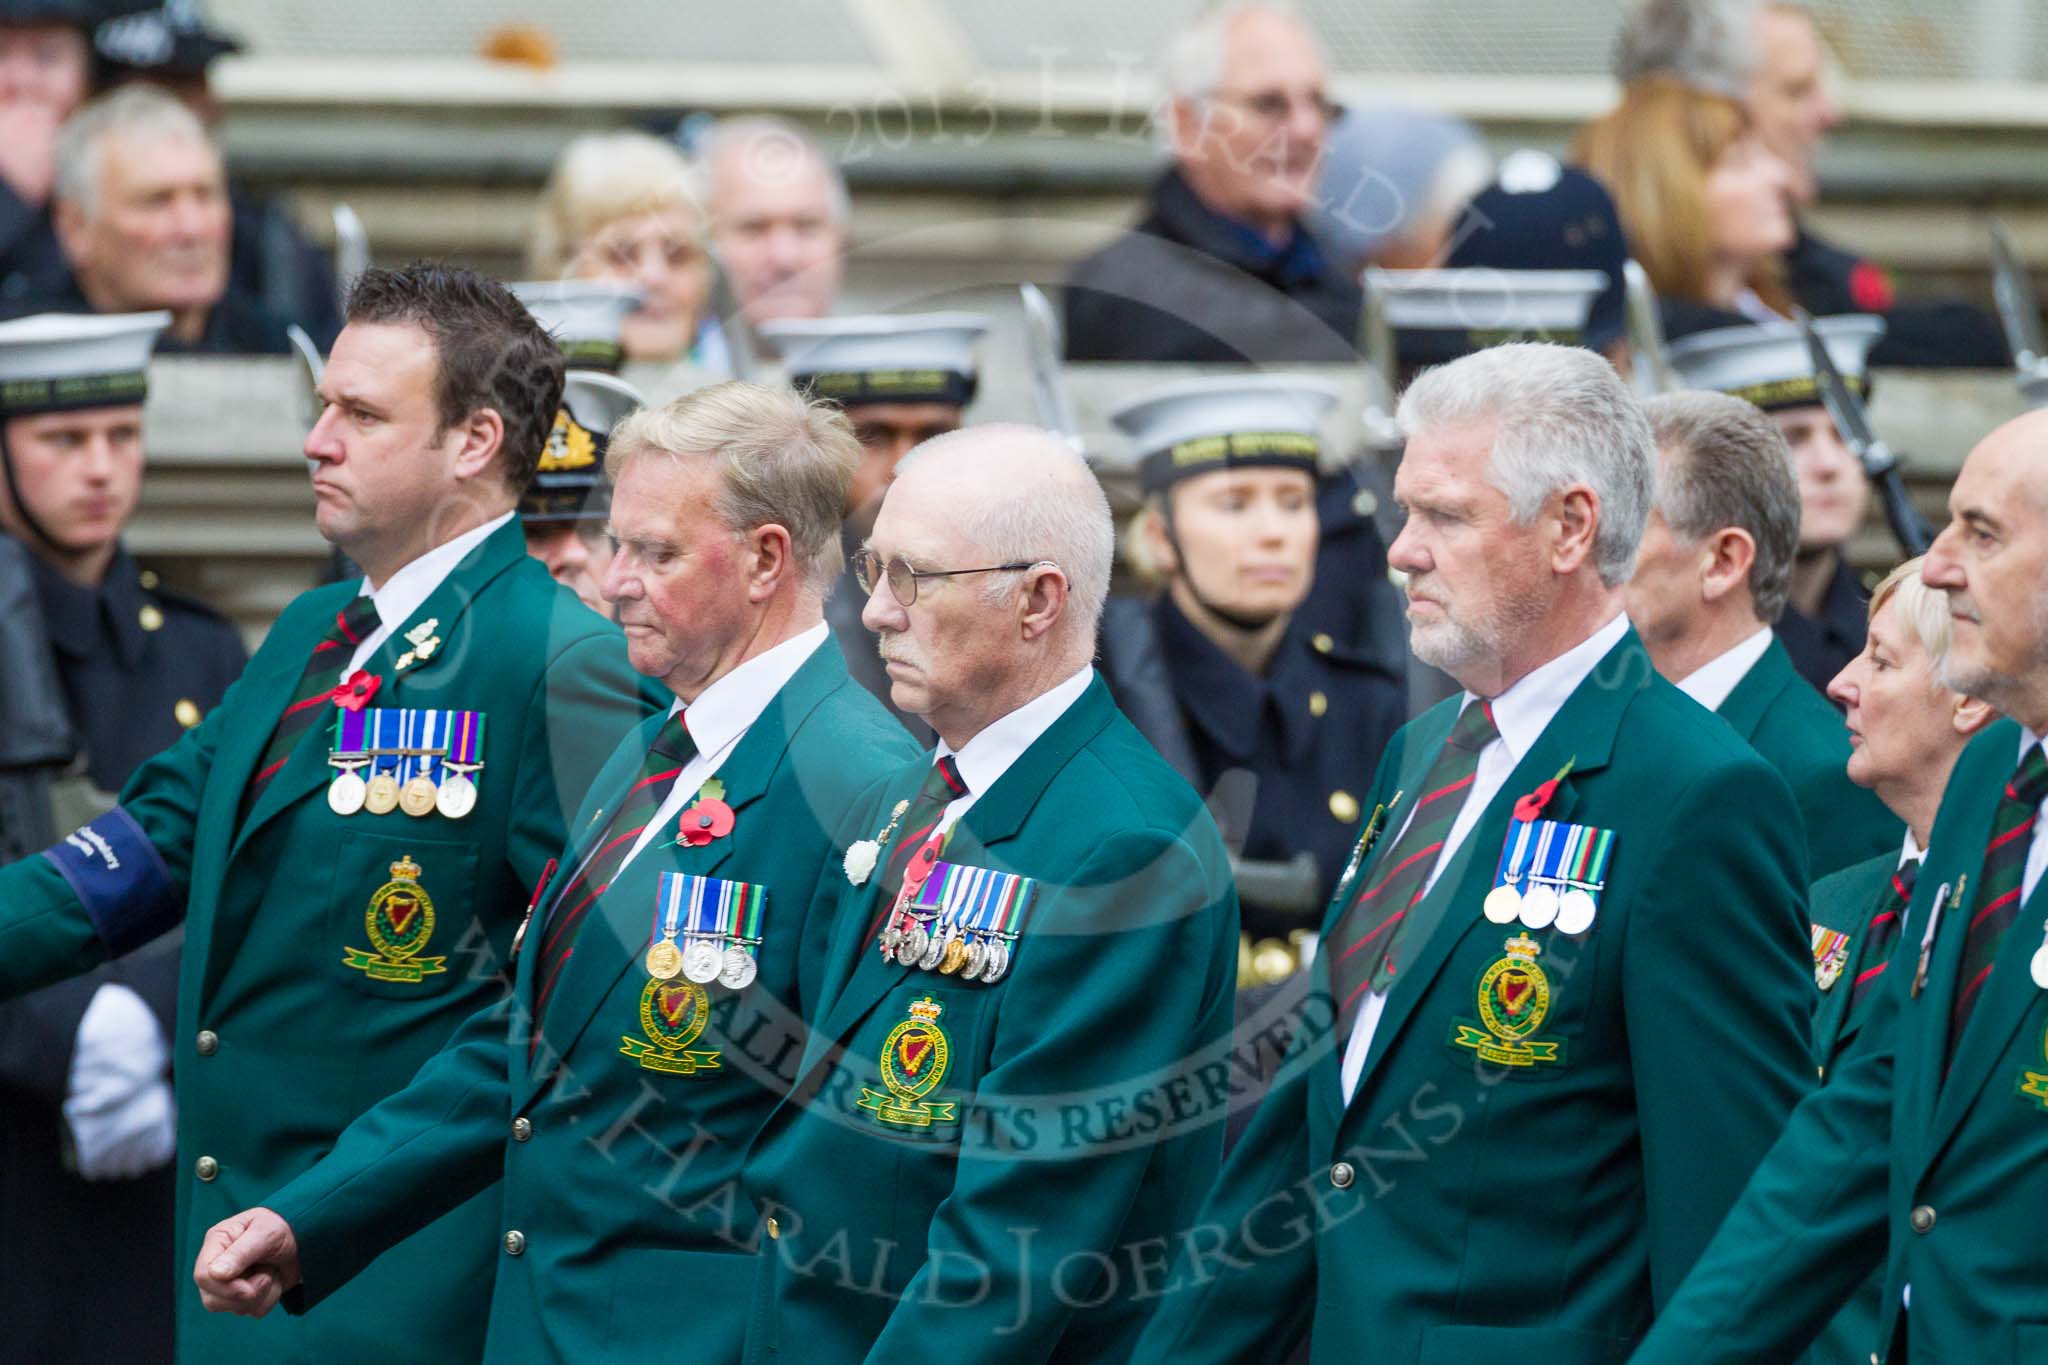 Remembrance Sunday at the Cenotaph 2015: Group M19, Royal Ulster Constabulary (GC) Association.
Cenotaph, Whitehall, London SW1,
London,
Greater London,
United Kingdom,
on 08 November 2015 at 12:16, image #1526